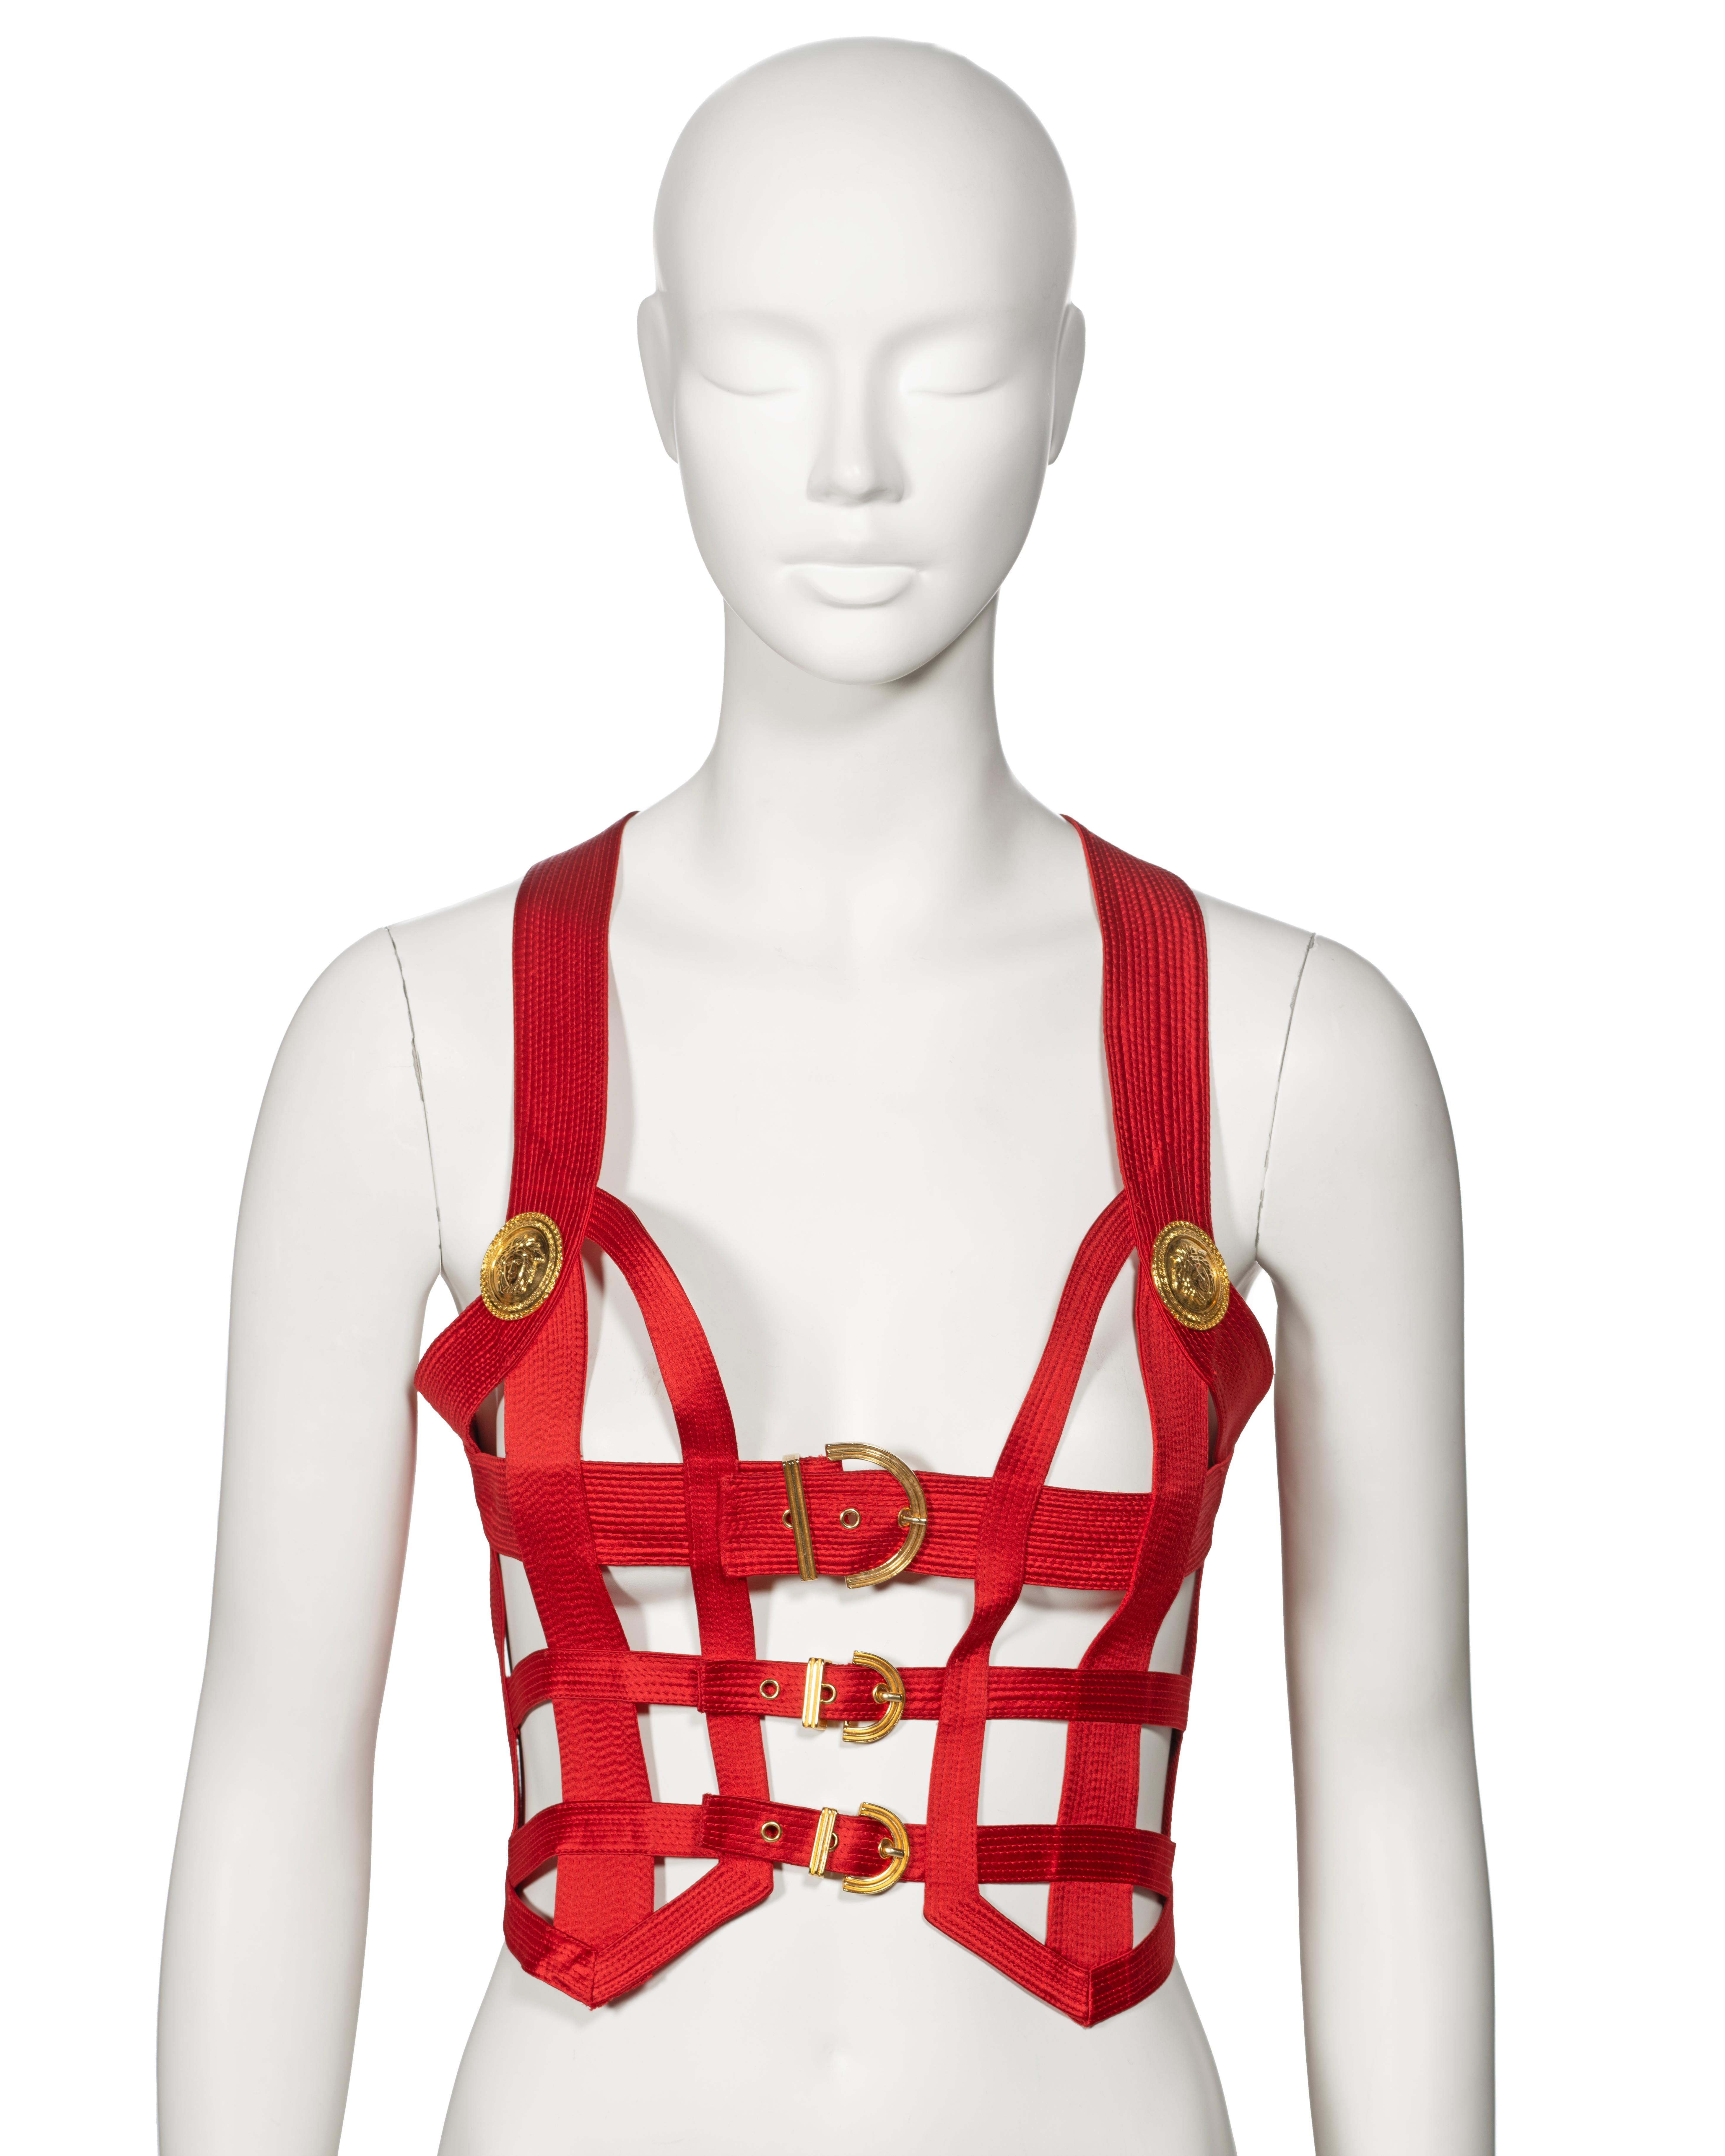 ▪ Archival Gianni Versace Bondage Corset 
▪ Creative Director: Gianni Versace
▪ Fall-Winter 1992
▪ Sold by One of a Kind Archive
▪ Museum Grade
▪ Constructed from multiple red channel stitch silk bands forming a caged design
▪ Gold tone Medusa